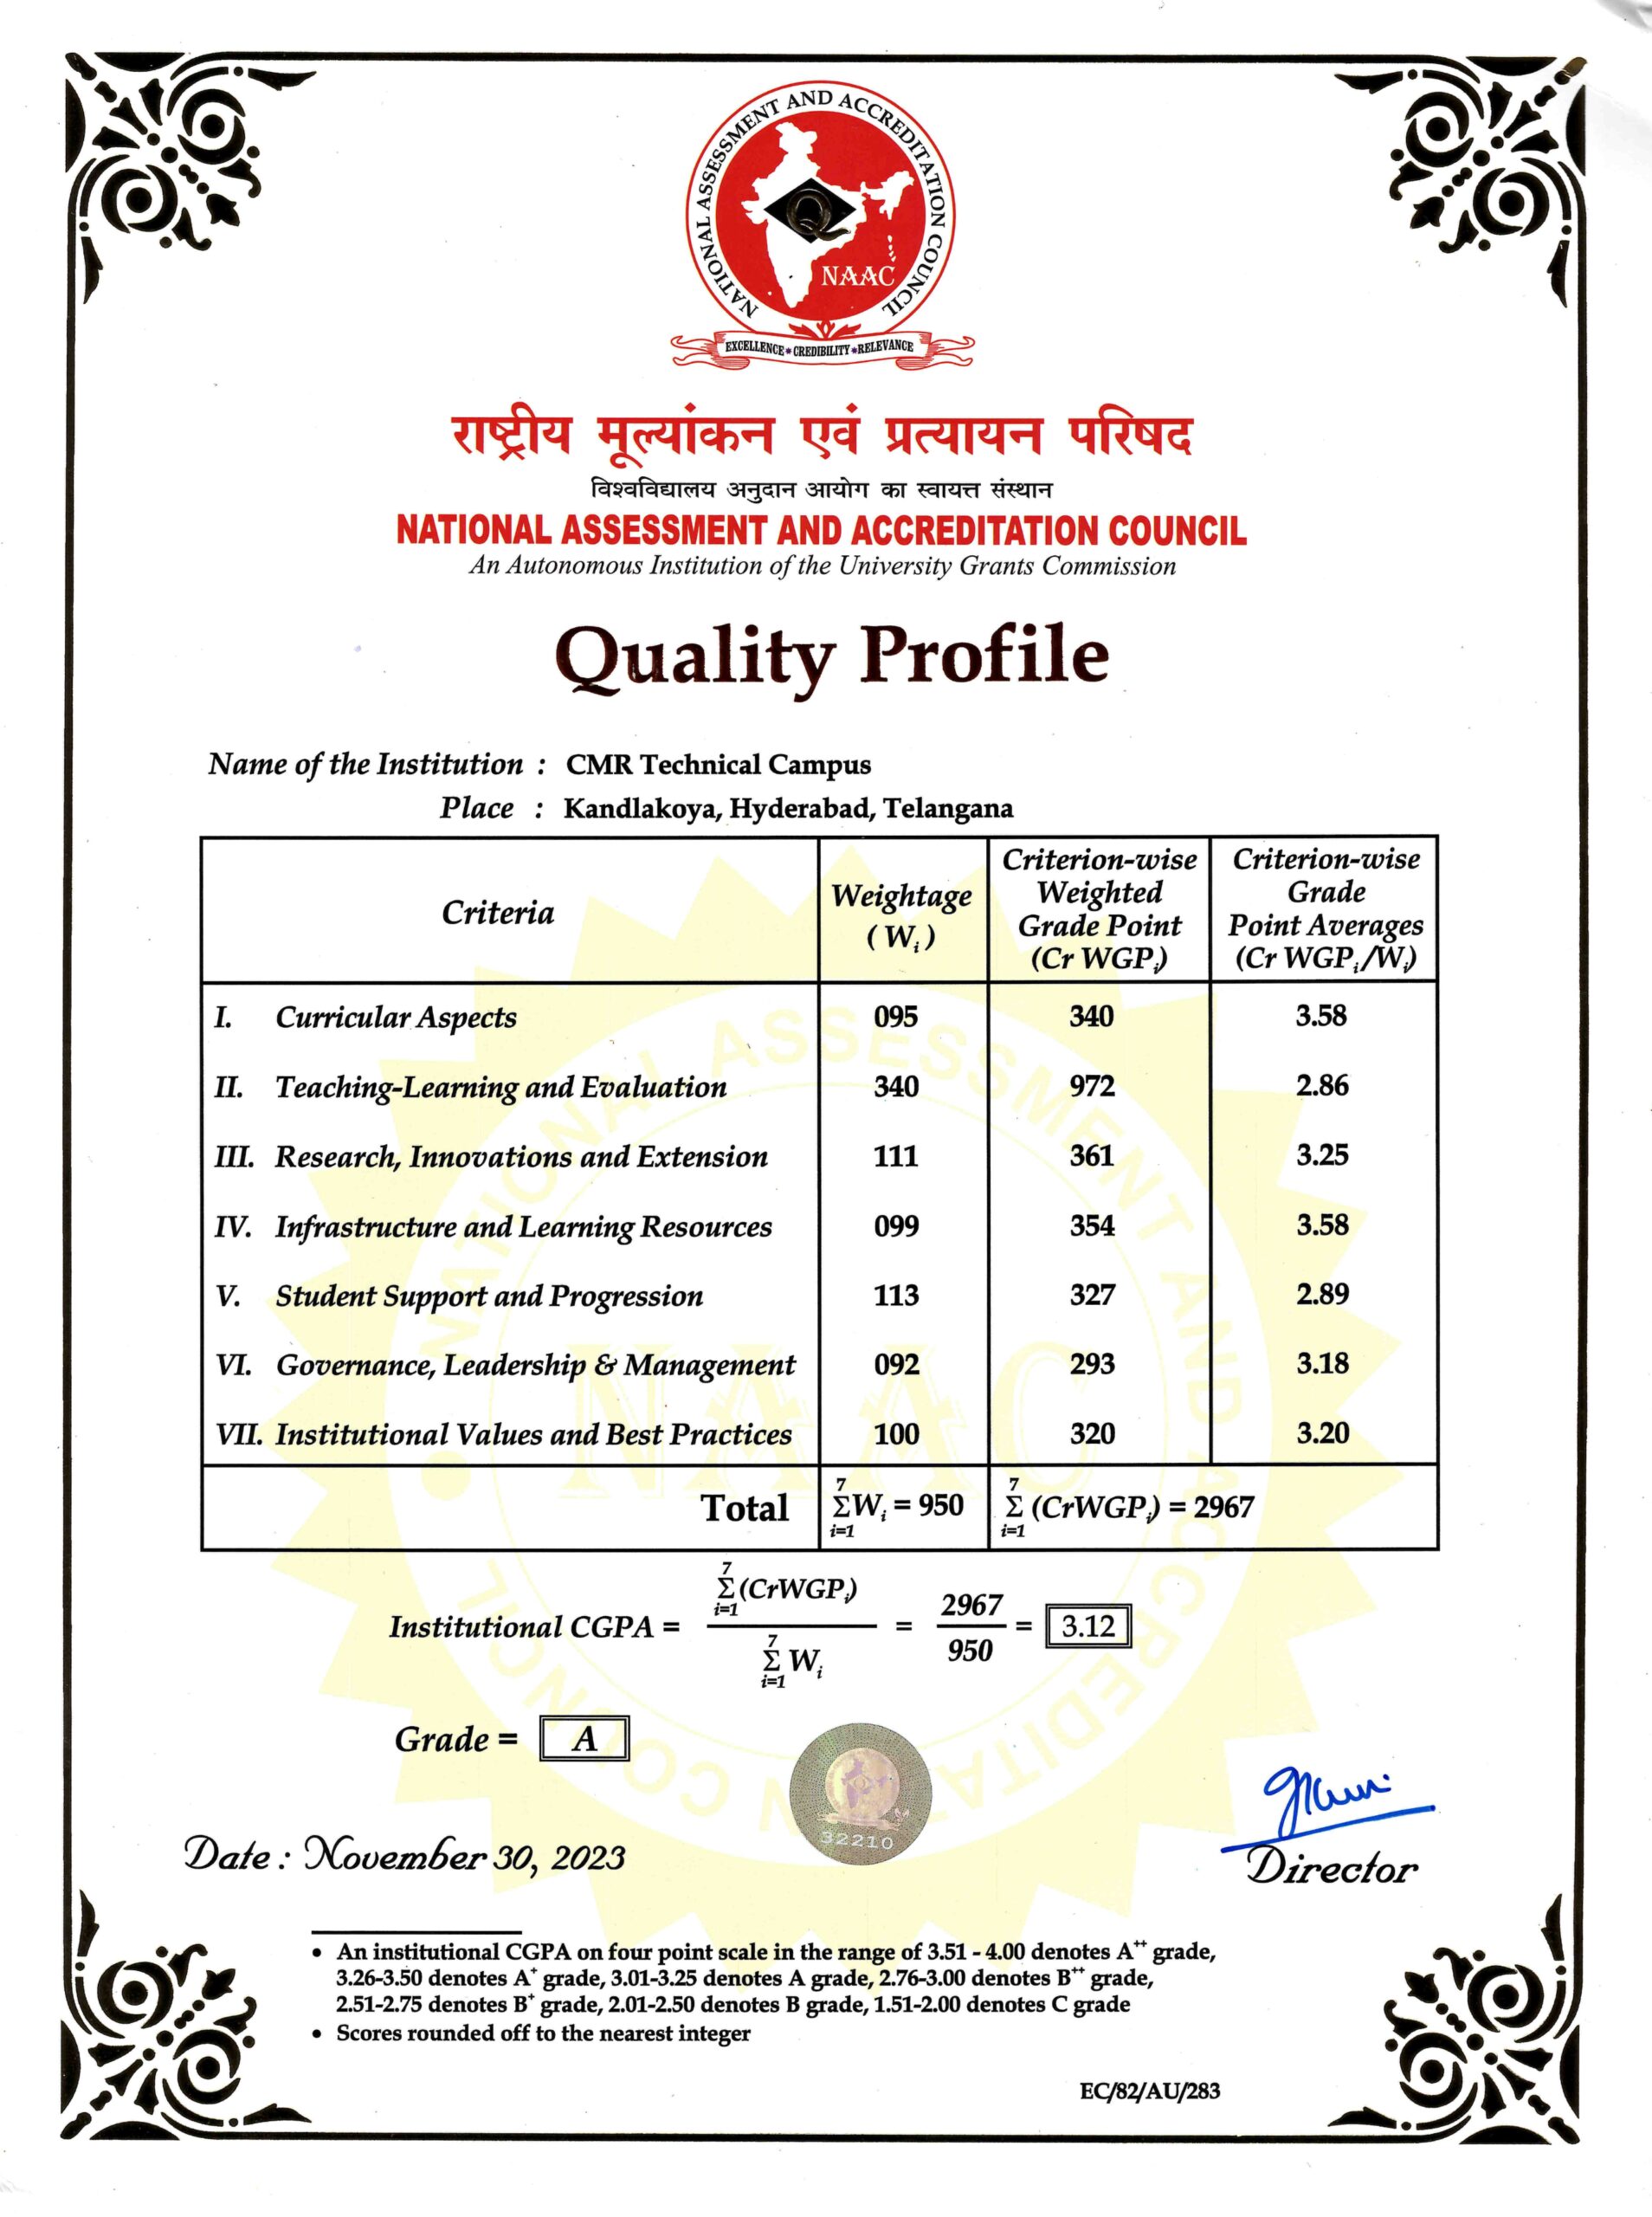 NAAC Extension Quality Profile scaled